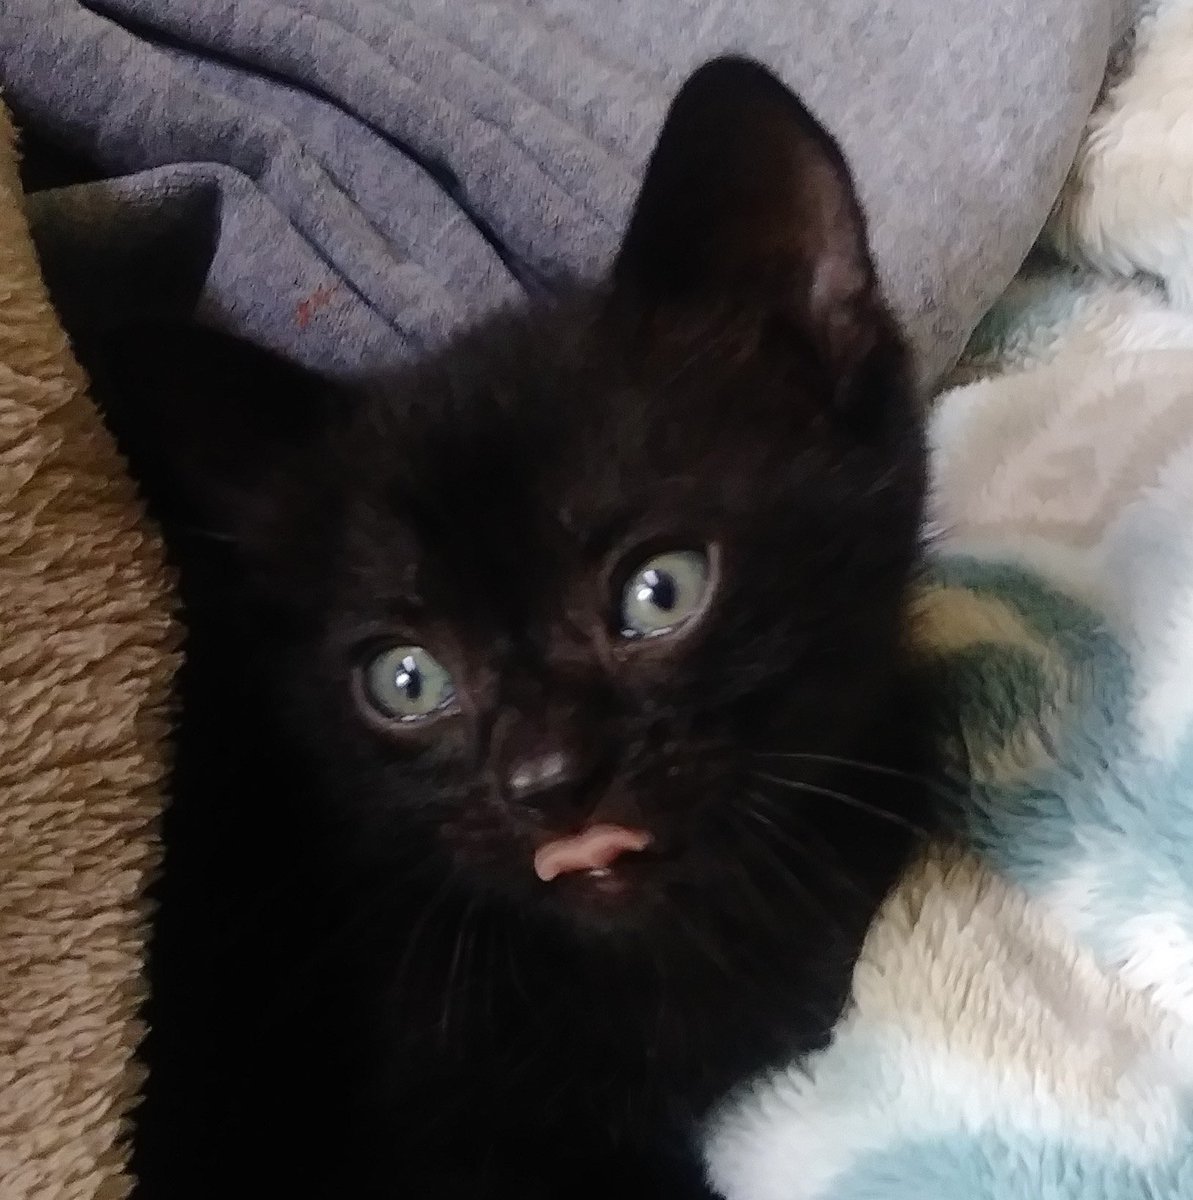 My very first tongue out pic at 8 days old. 👅🐾 #tongueouttuesday #kitten #catoftheday